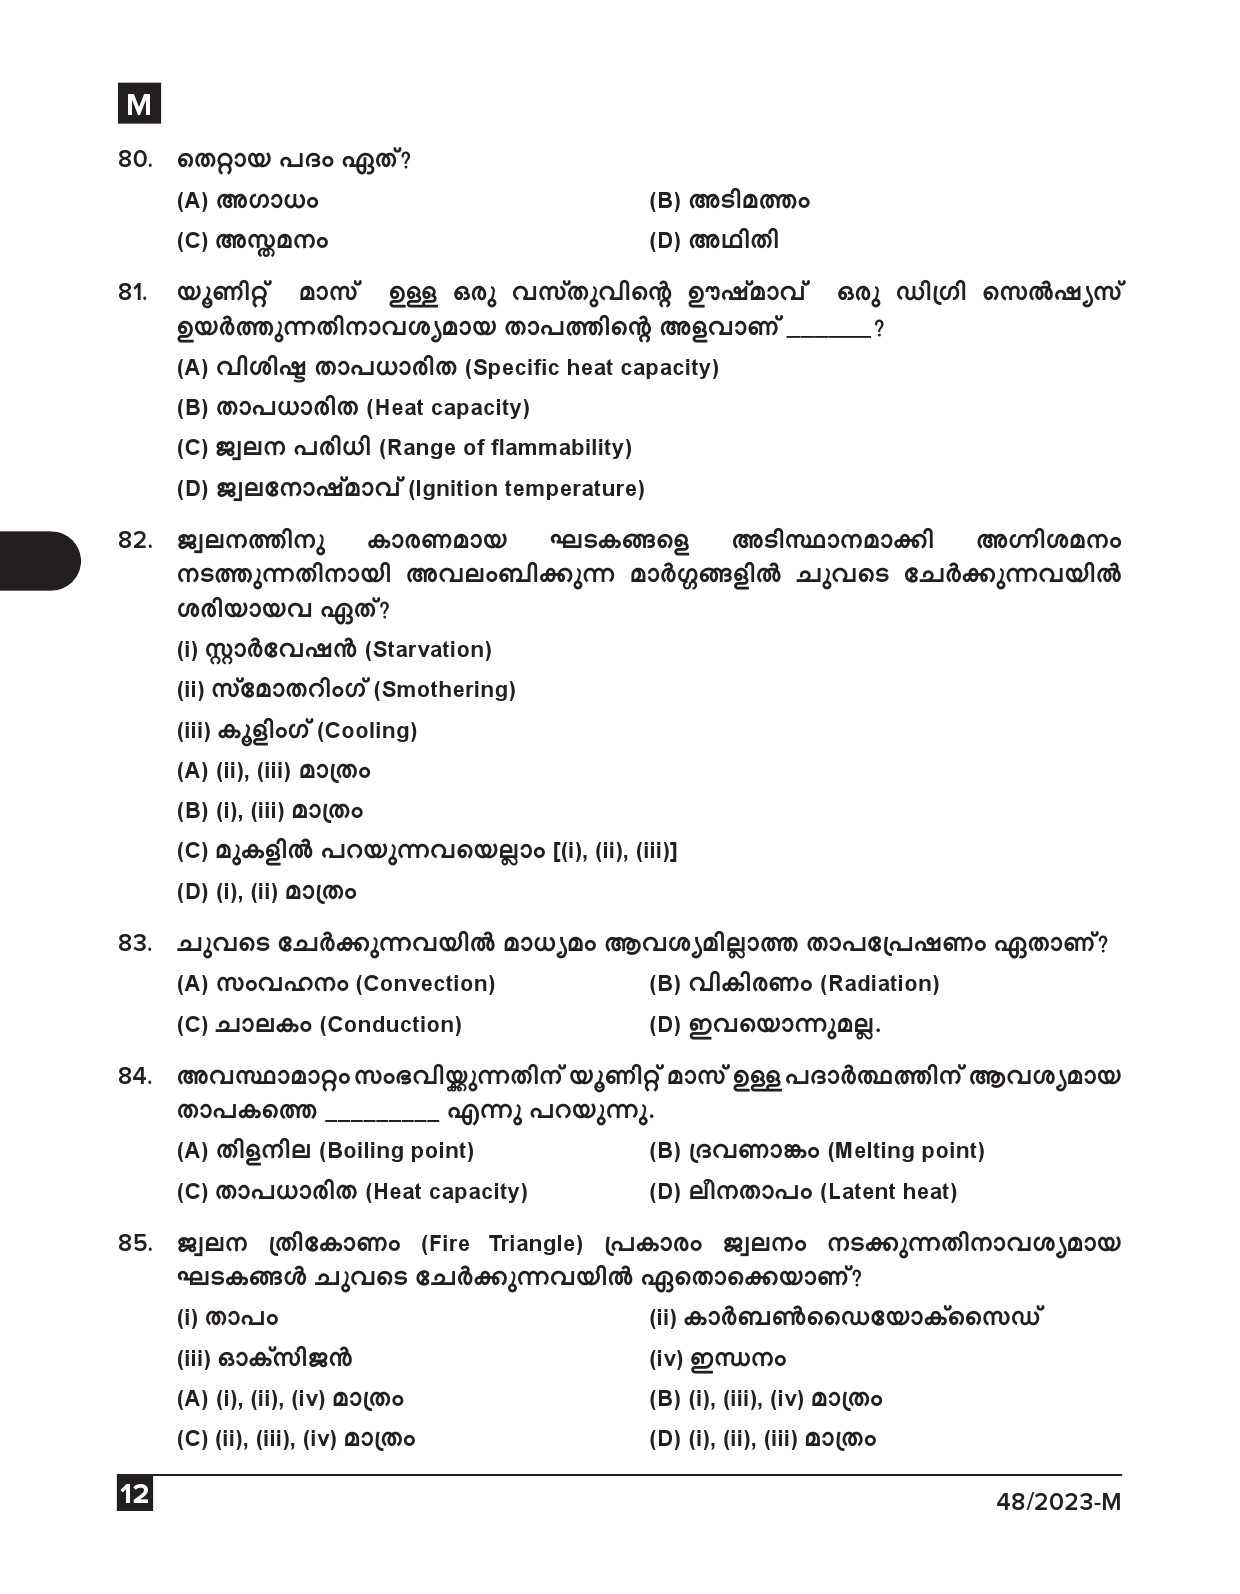 KPSC Fire and Rescue Officer Malayalam Exam 2023 Code 0482023 M 11